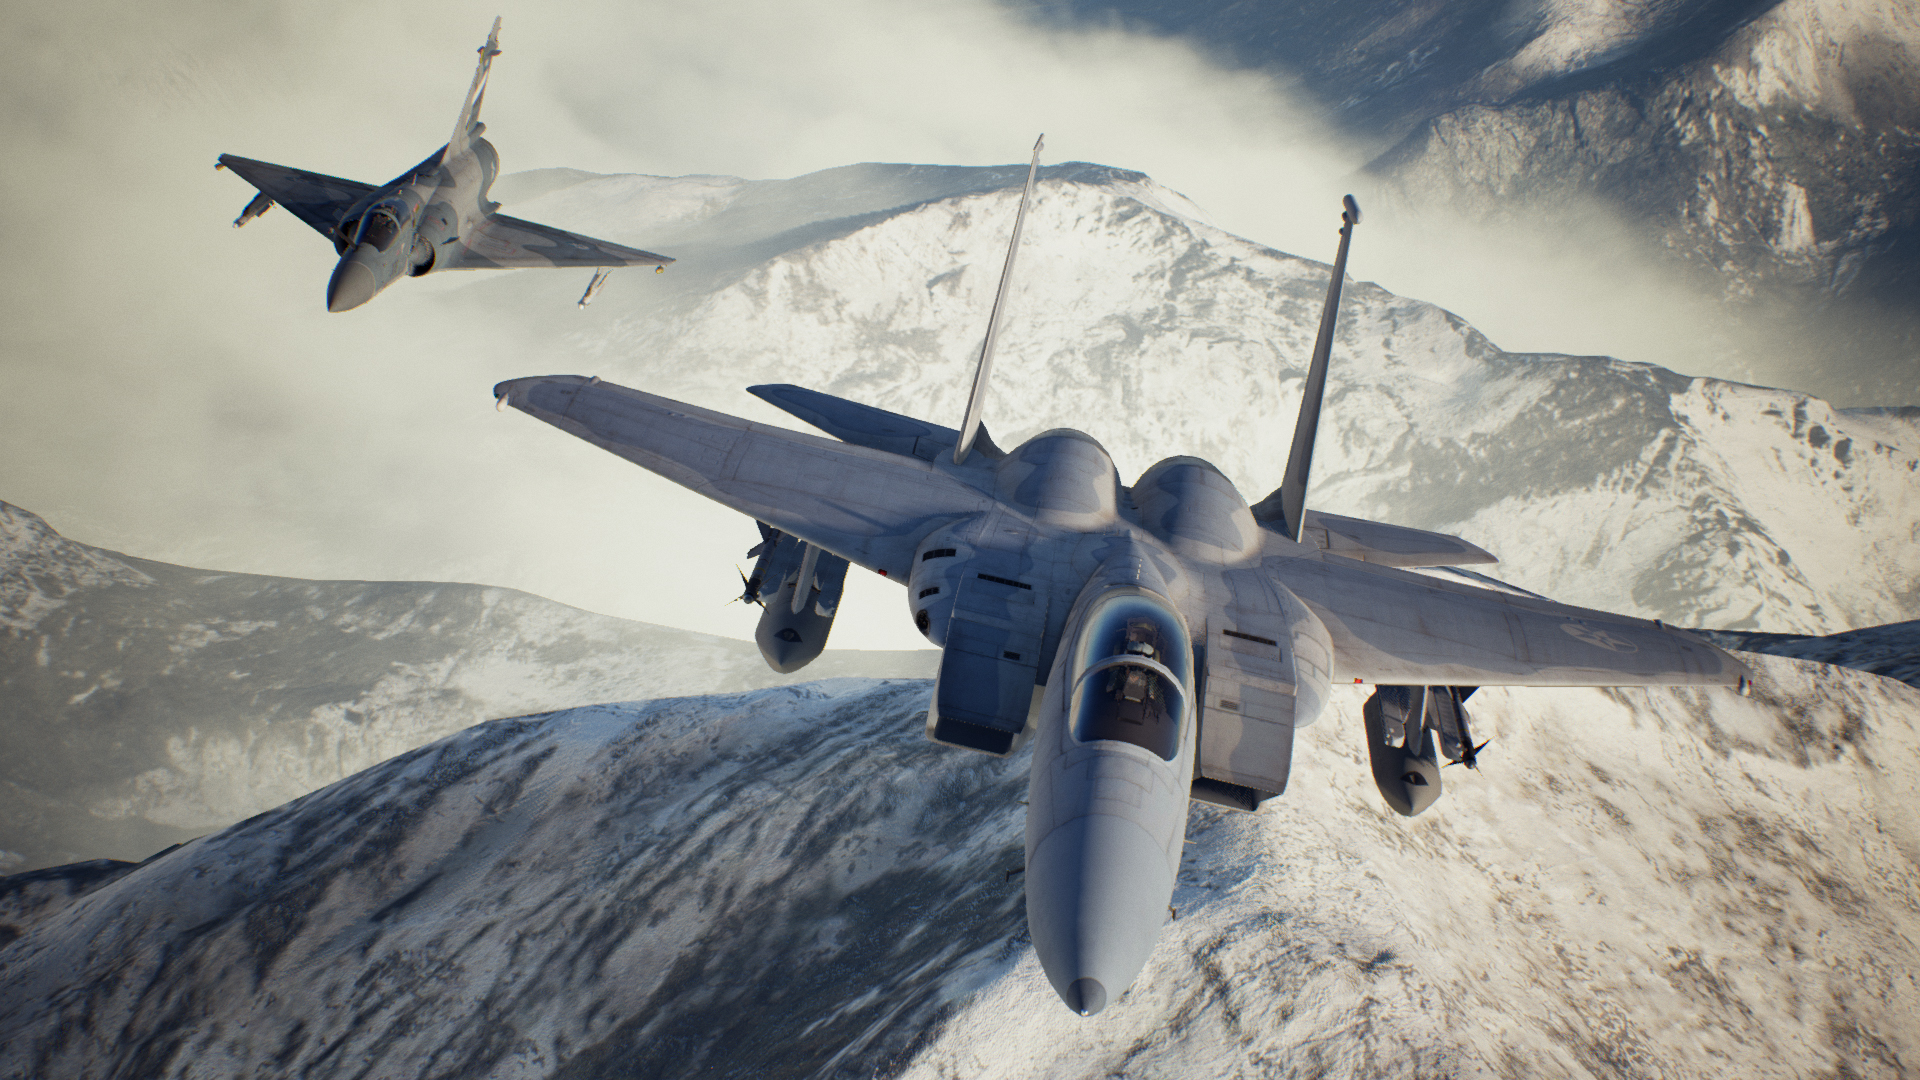 ACE COMBAT 7: SKIES UNKNOWN Standard Edition